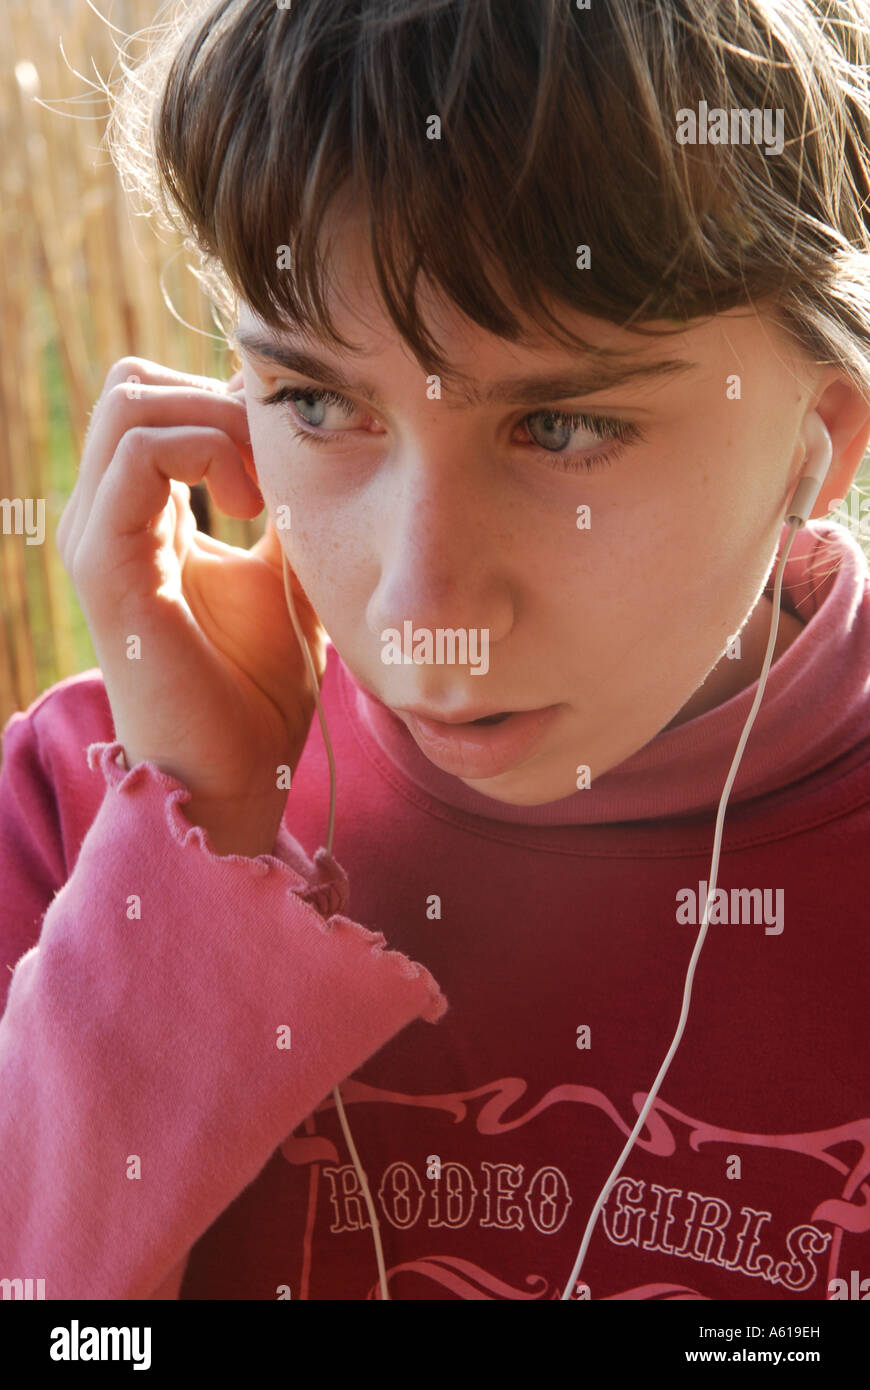 Girl hears music with the Apple IPod shuffle2 MP3 Player Stock Photo